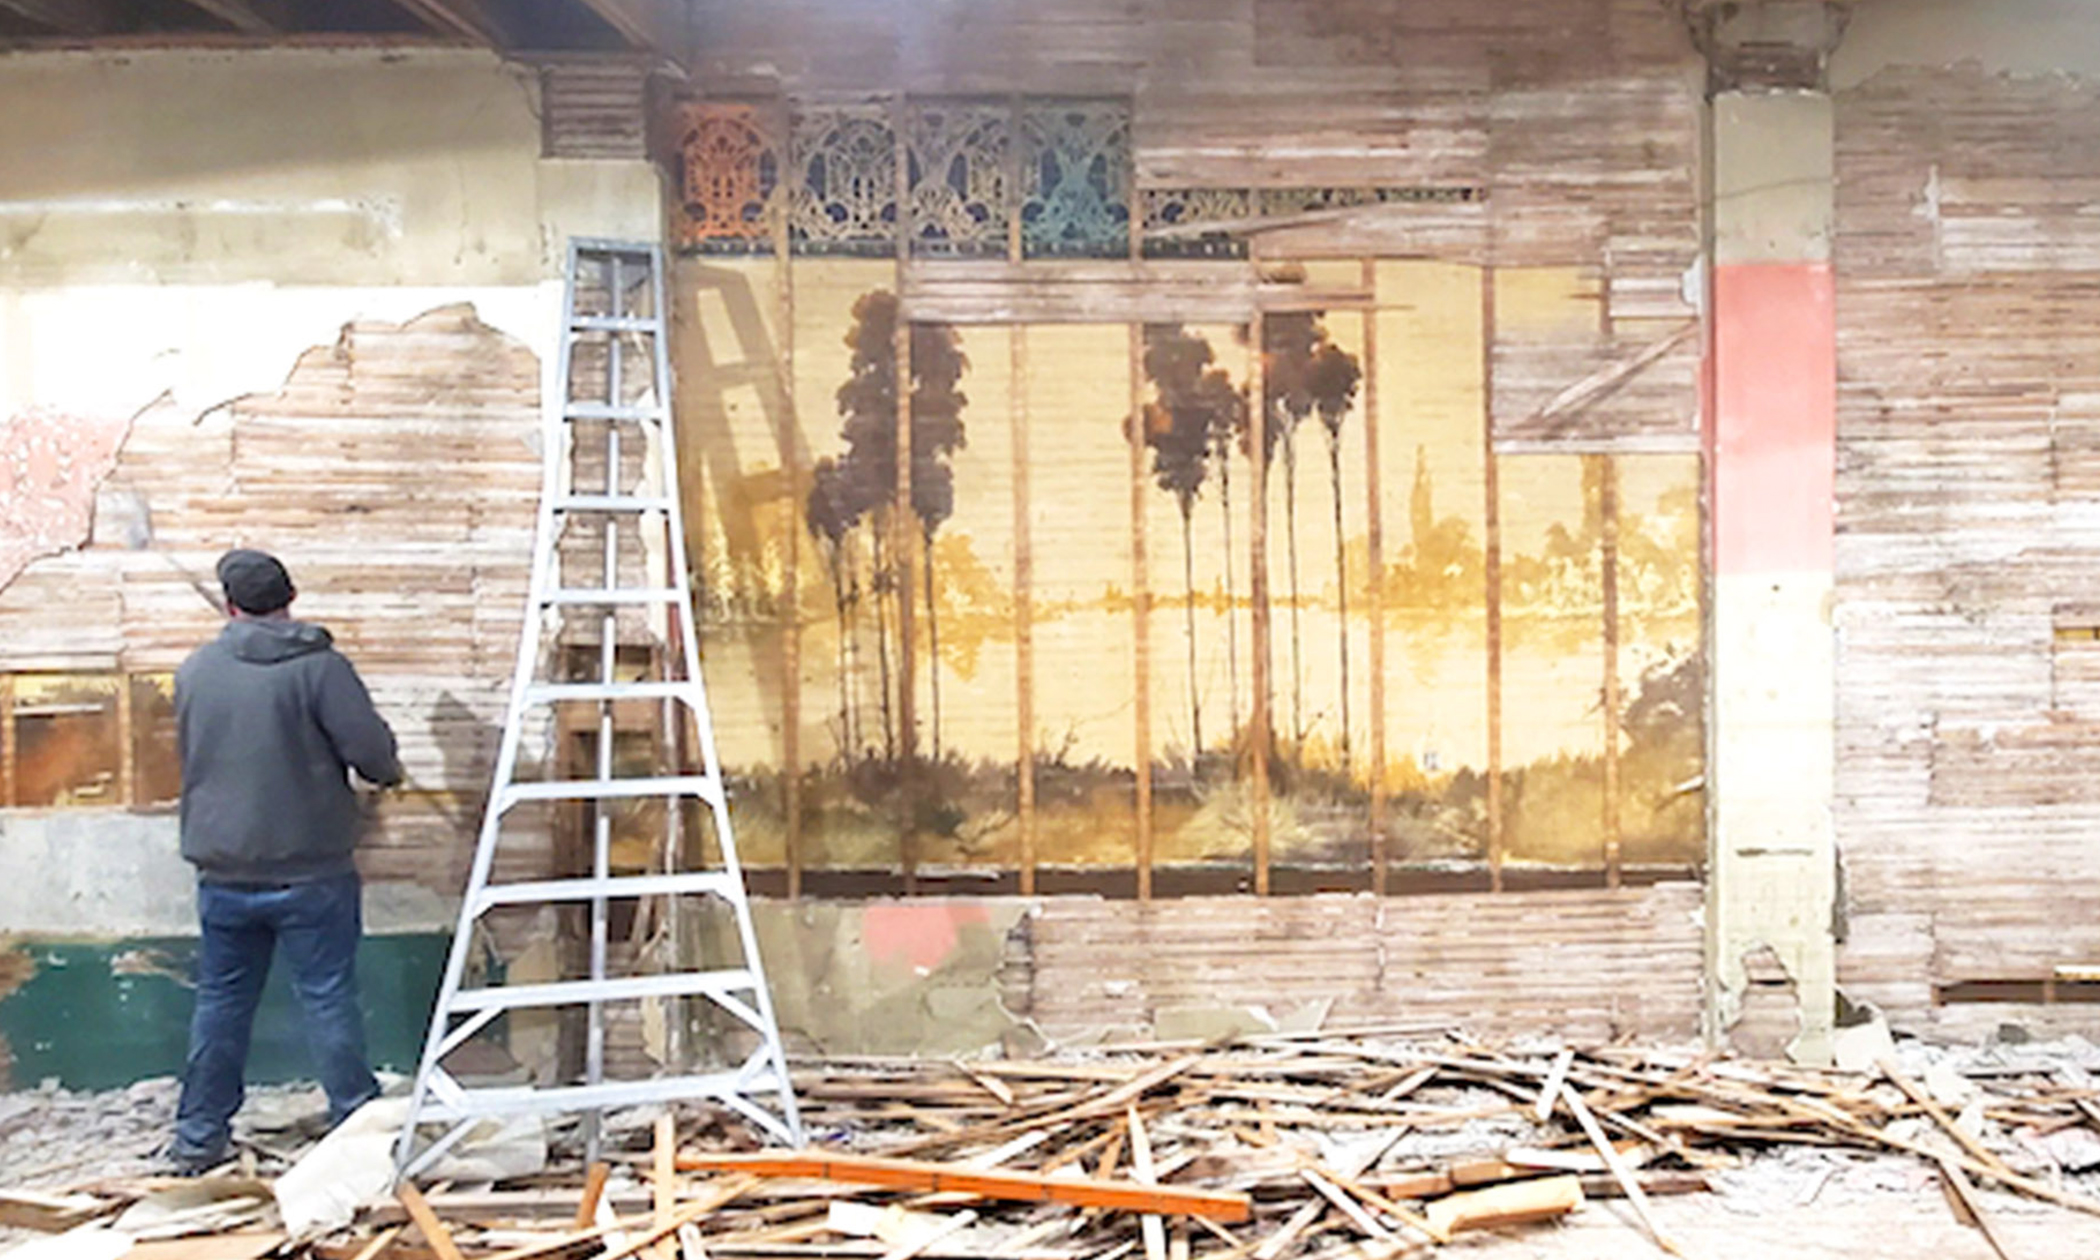 Couple Renovating Dilapidated Old Building Stumble on 60-Foot Century-Old Murals Hidden Behind the Walls